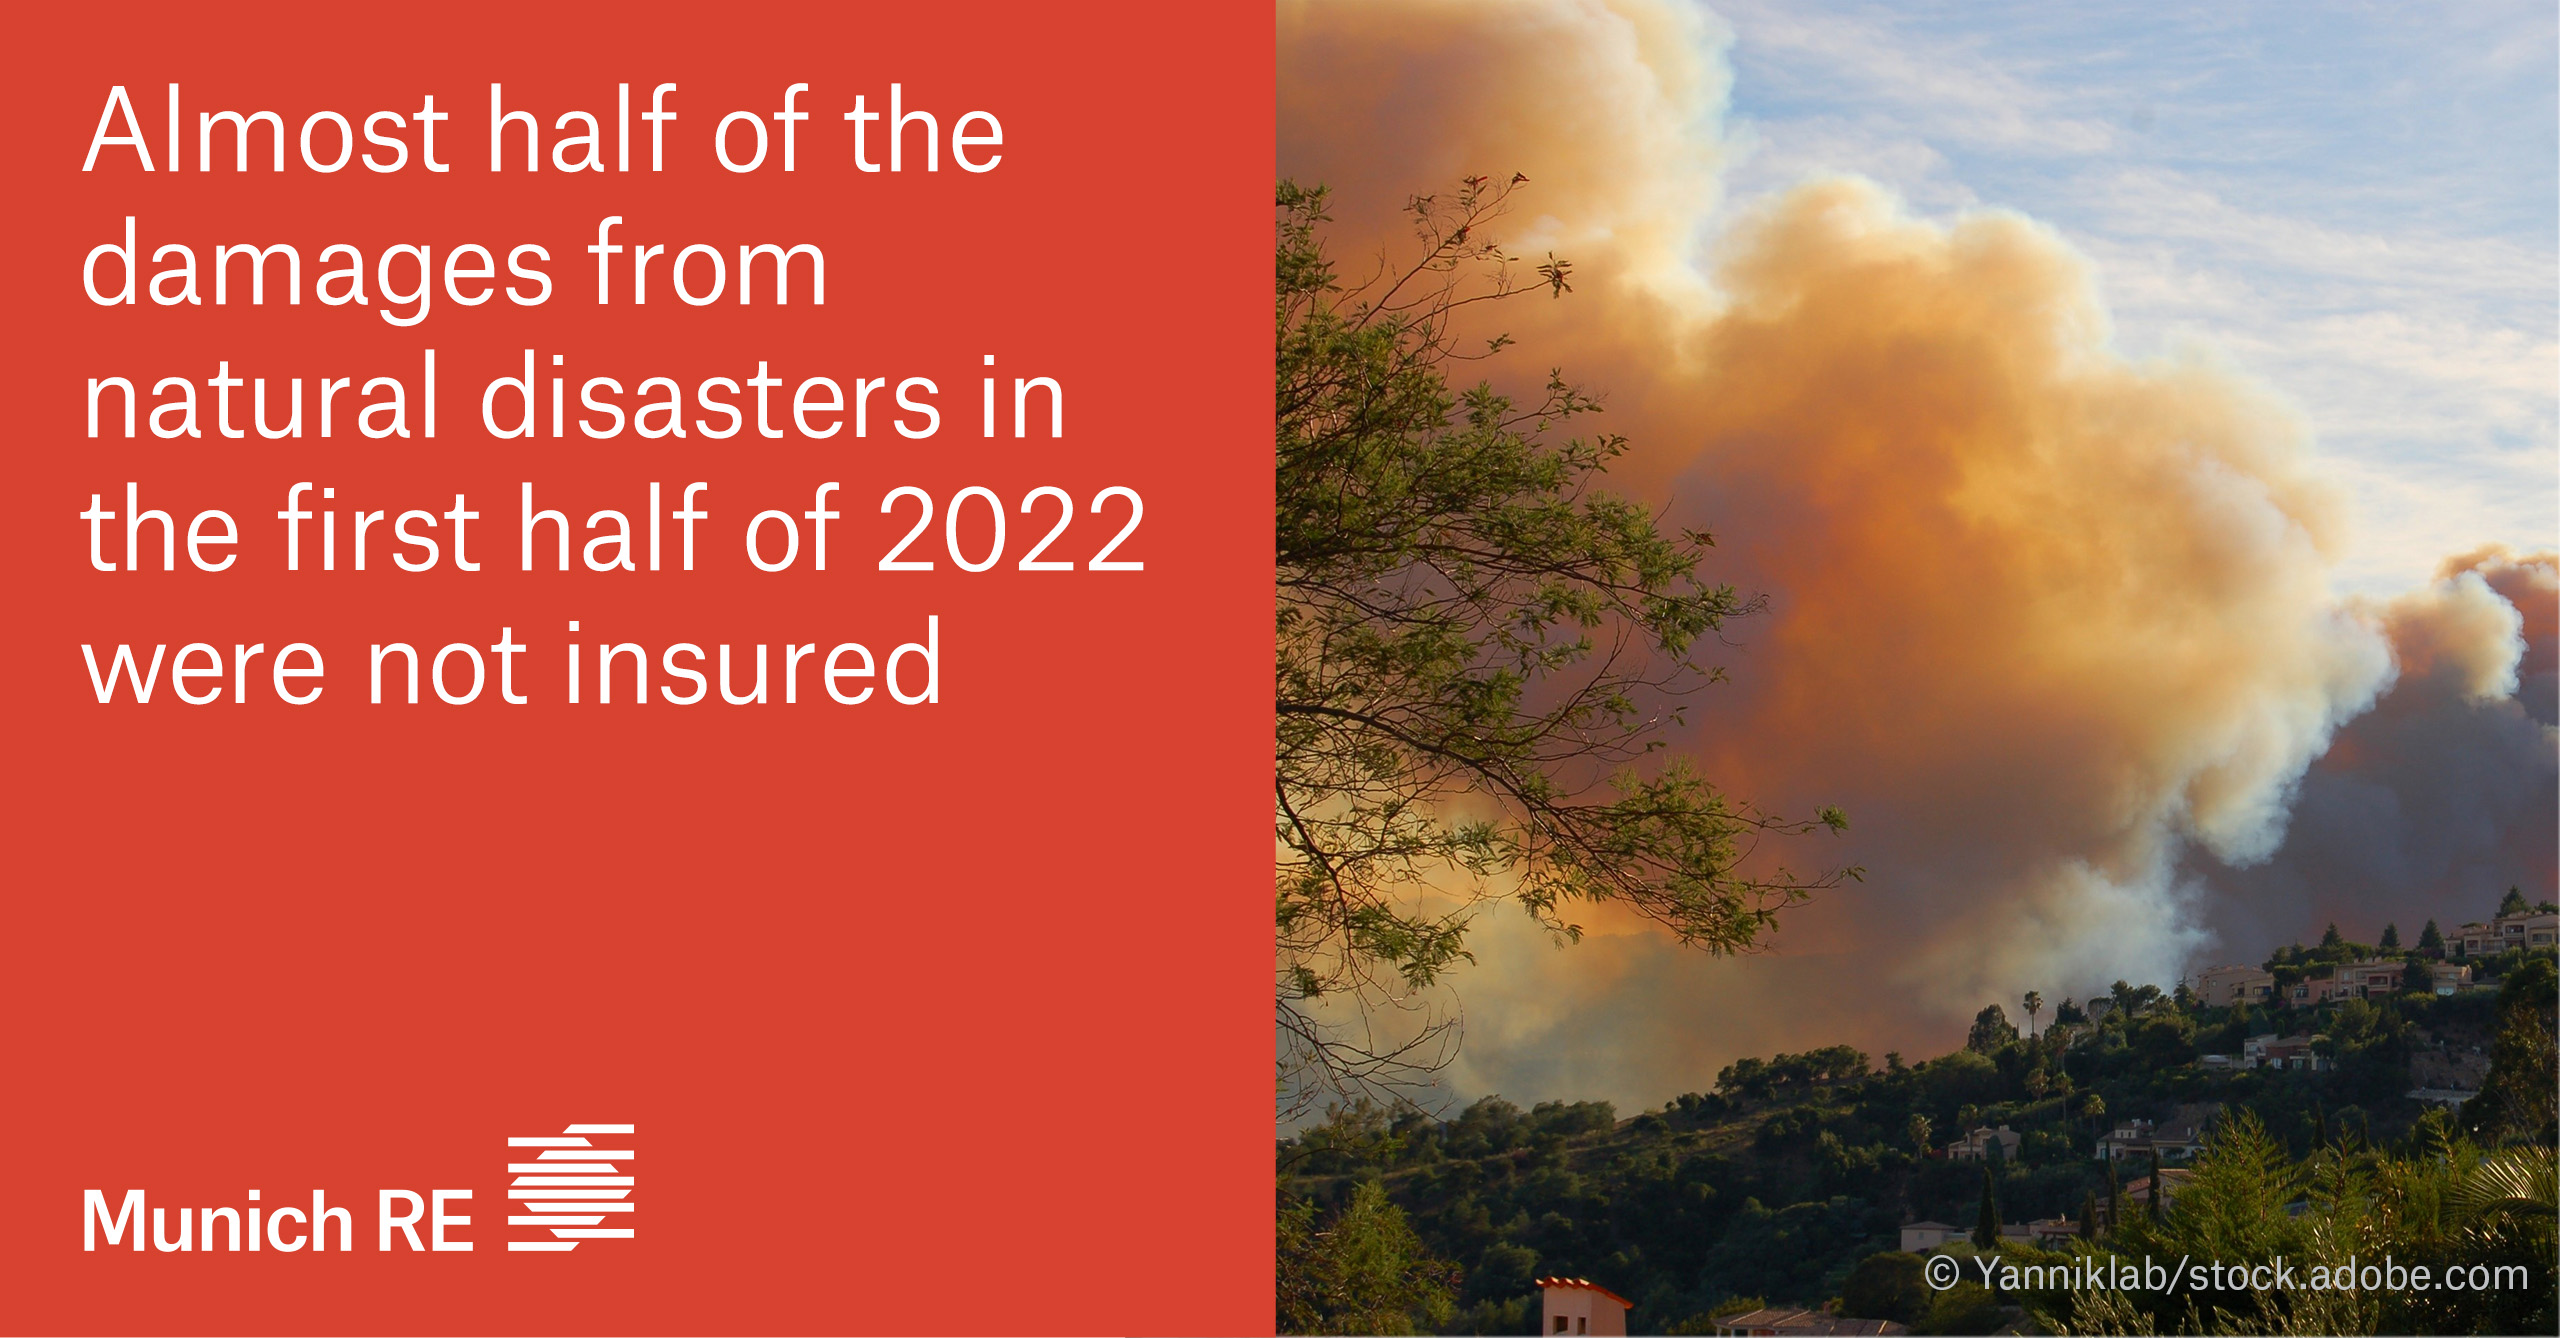 Climate risk: The importance of education, risk mitigation, and insurance